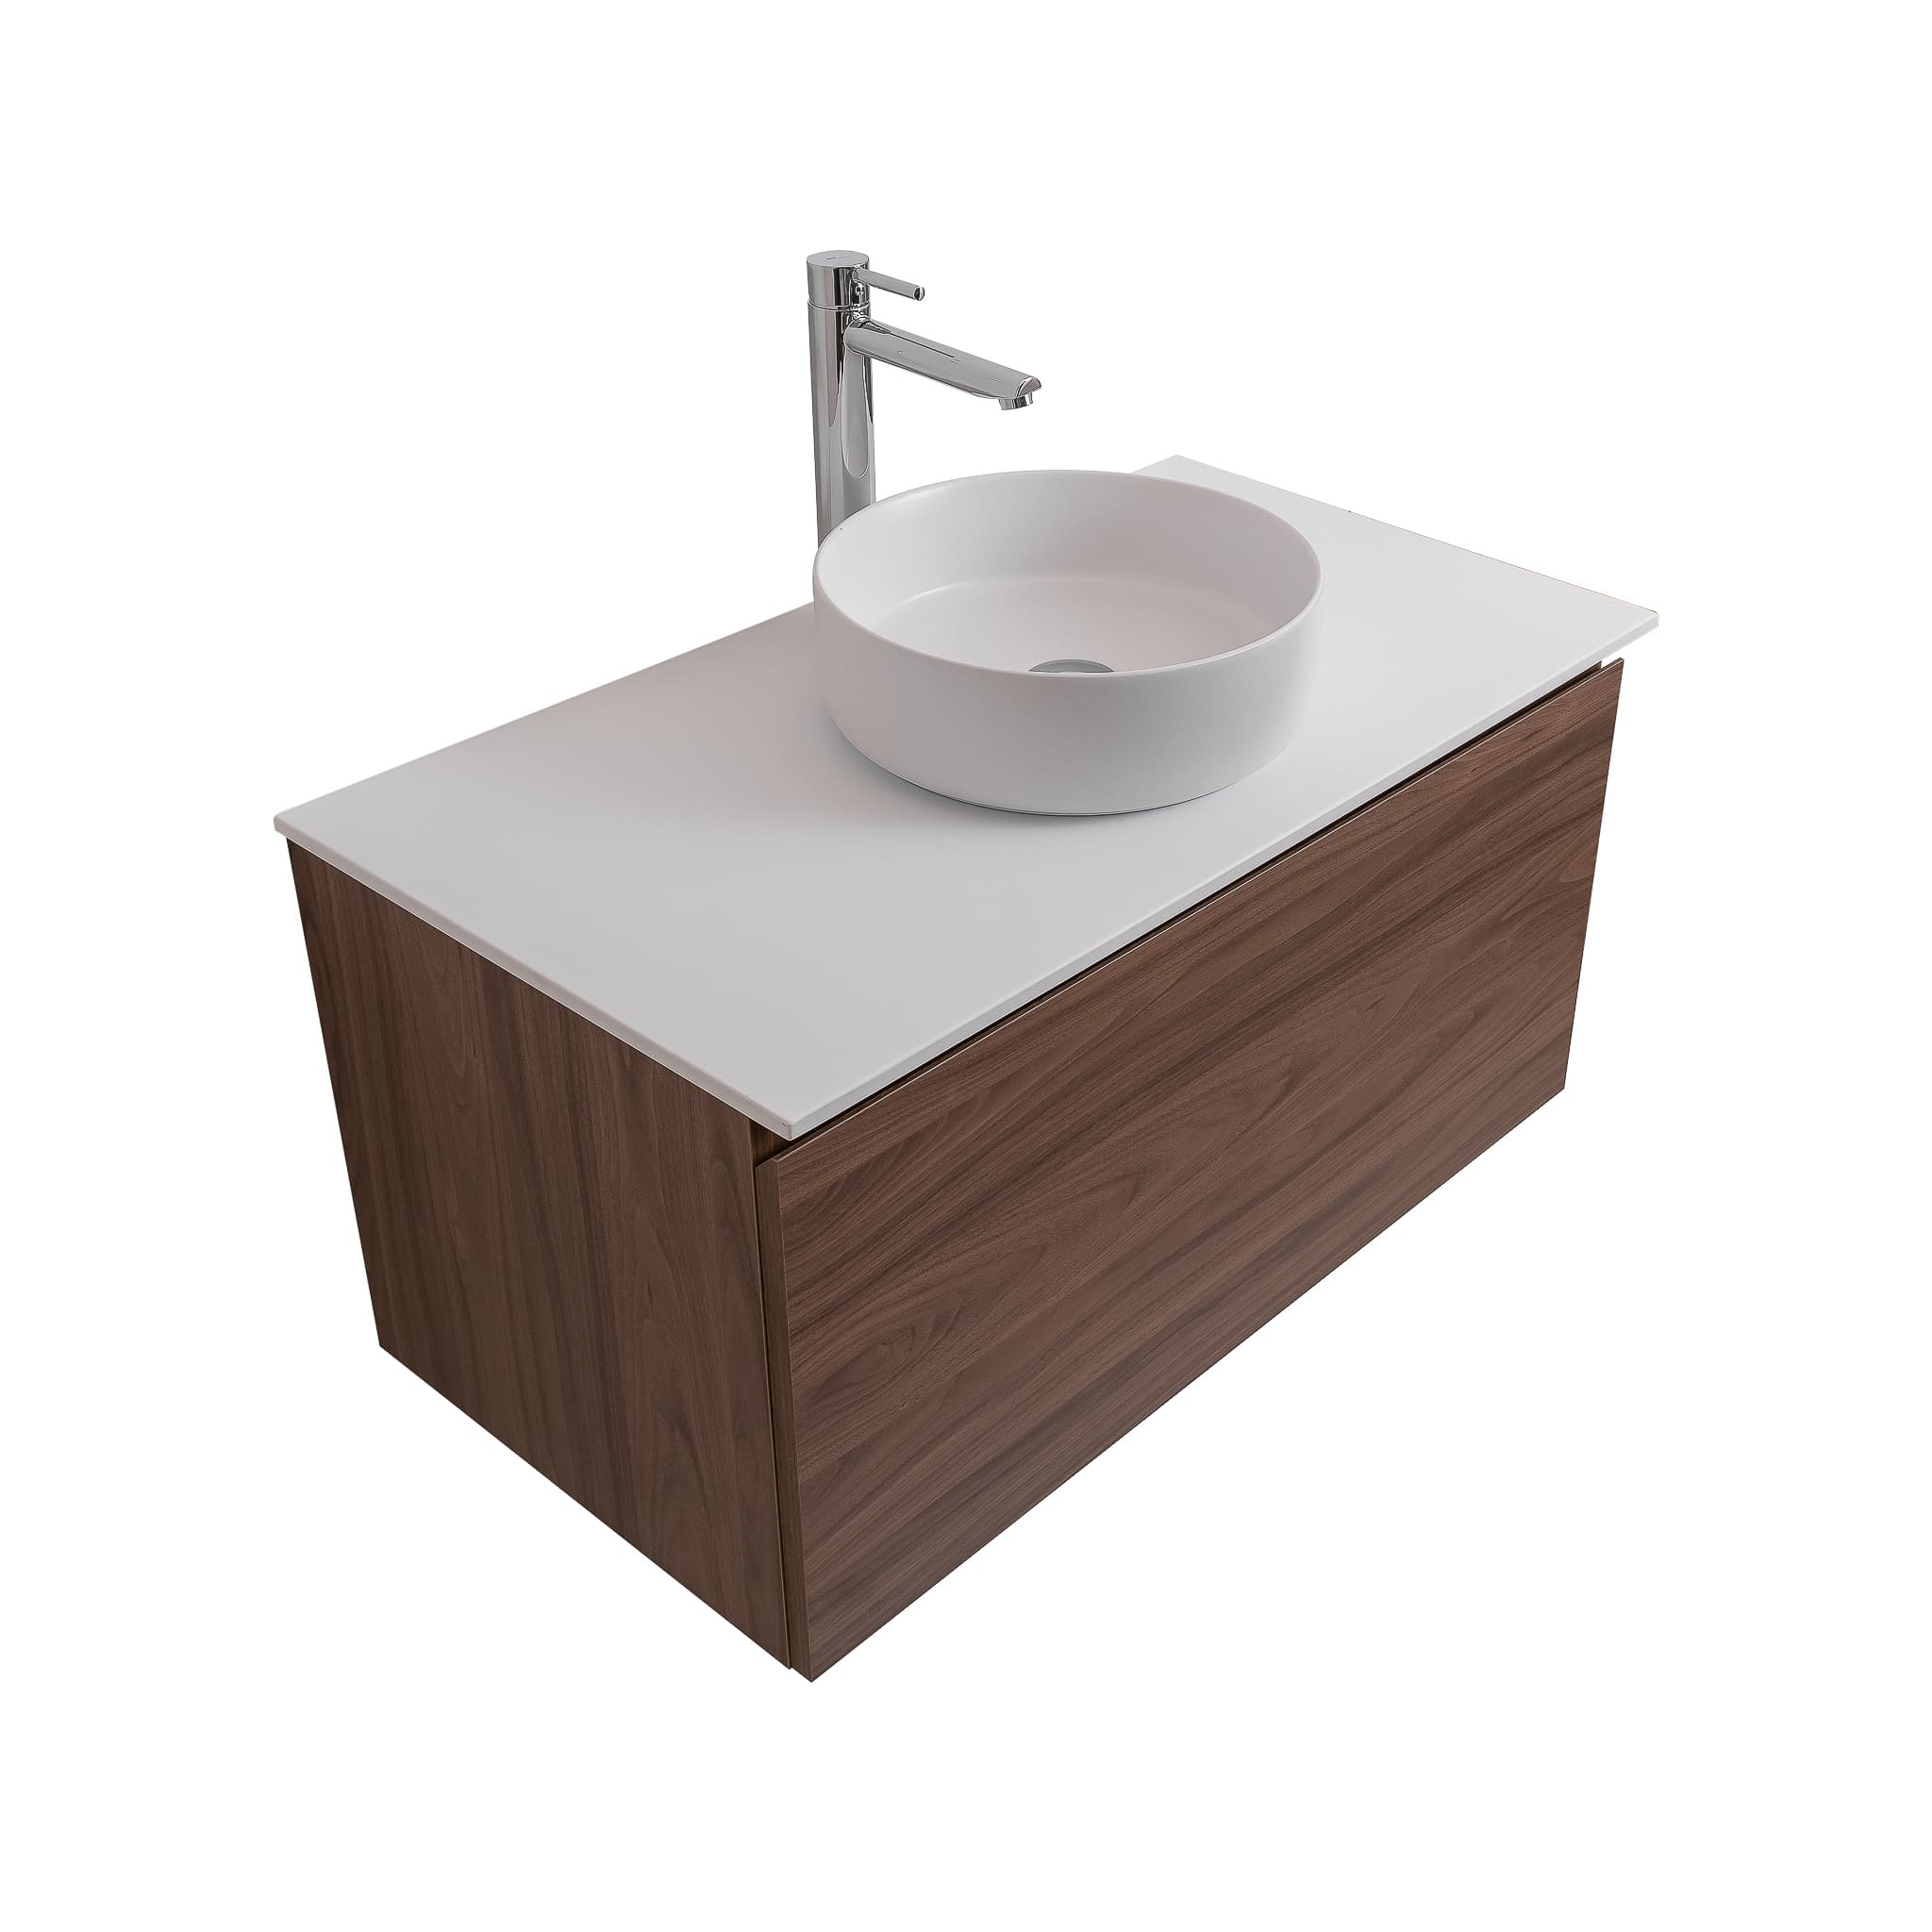 Venice 39.5 Walnut Wood Texture Cabinet, Ares White Top And Ares White Ceramic Basin, Wall Mounted Modern Vanity Set